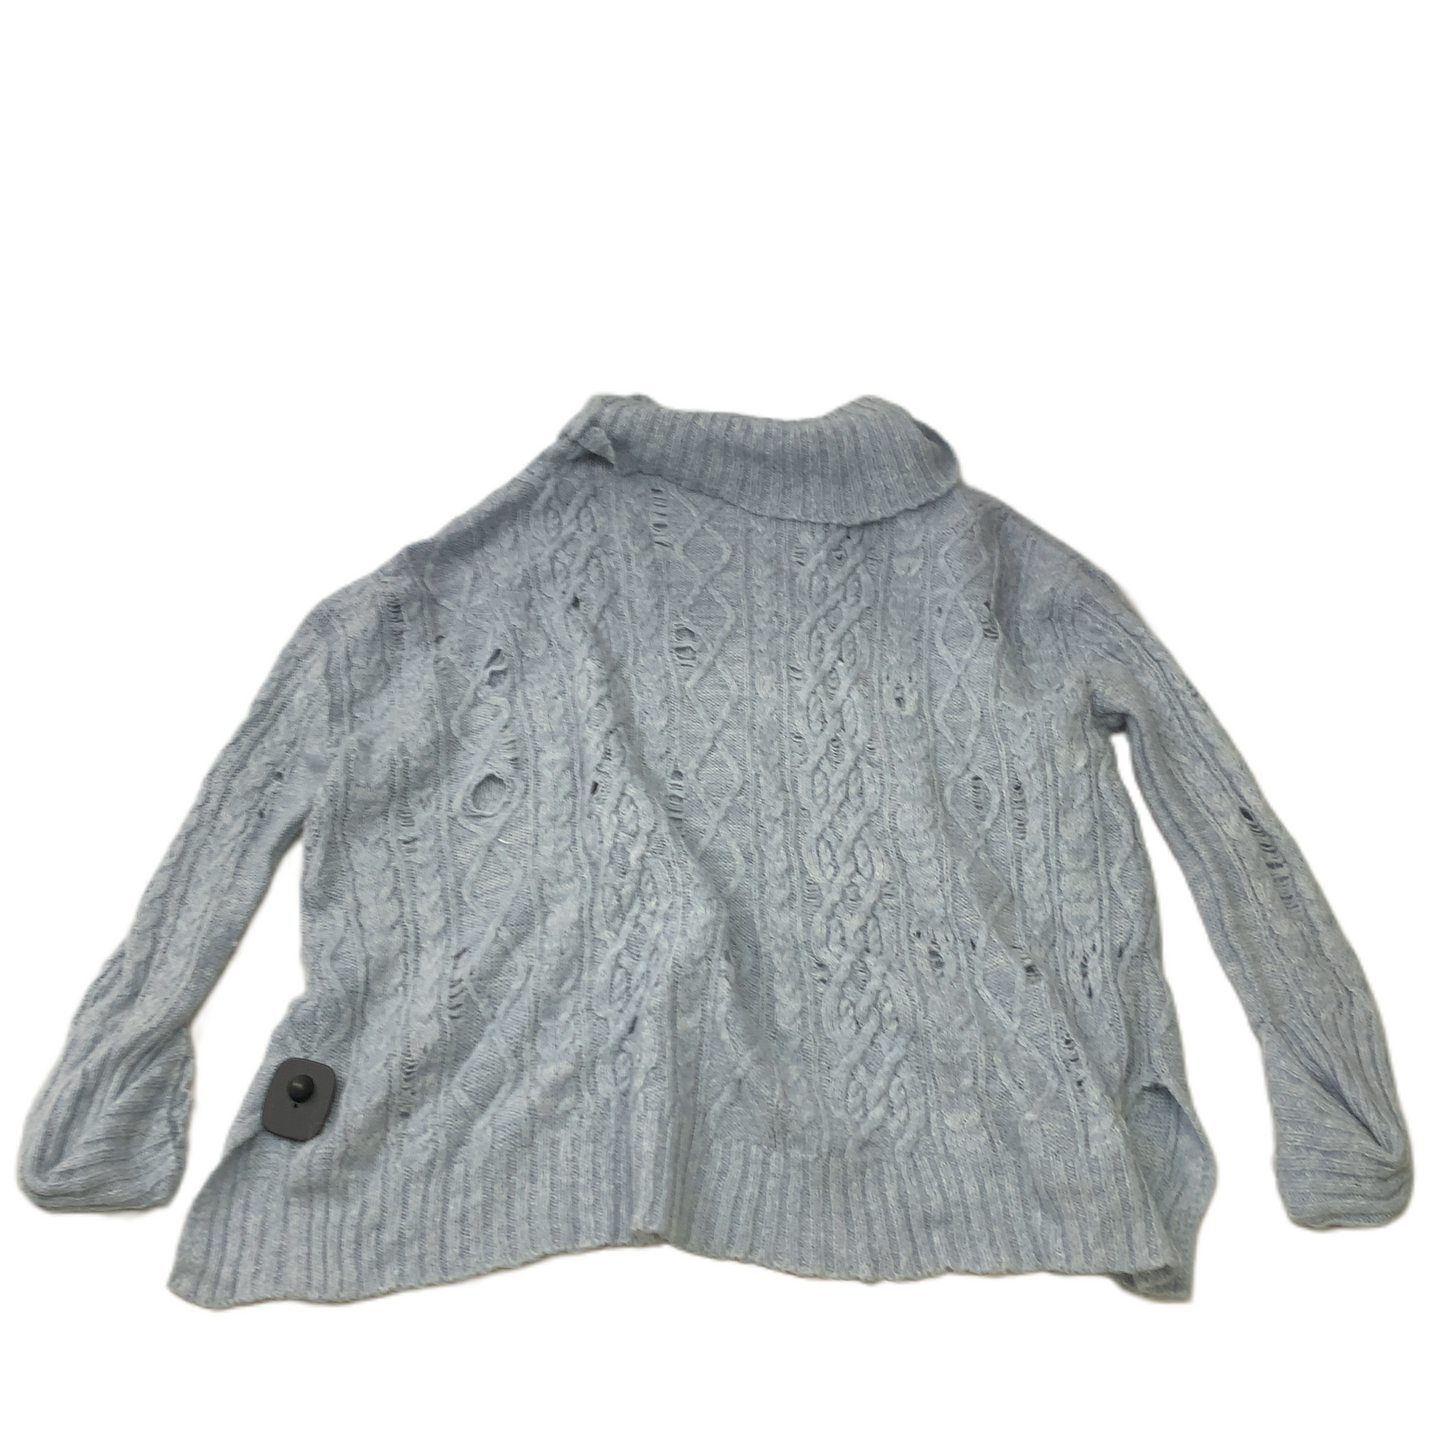 Sweater By Free People  Size: S